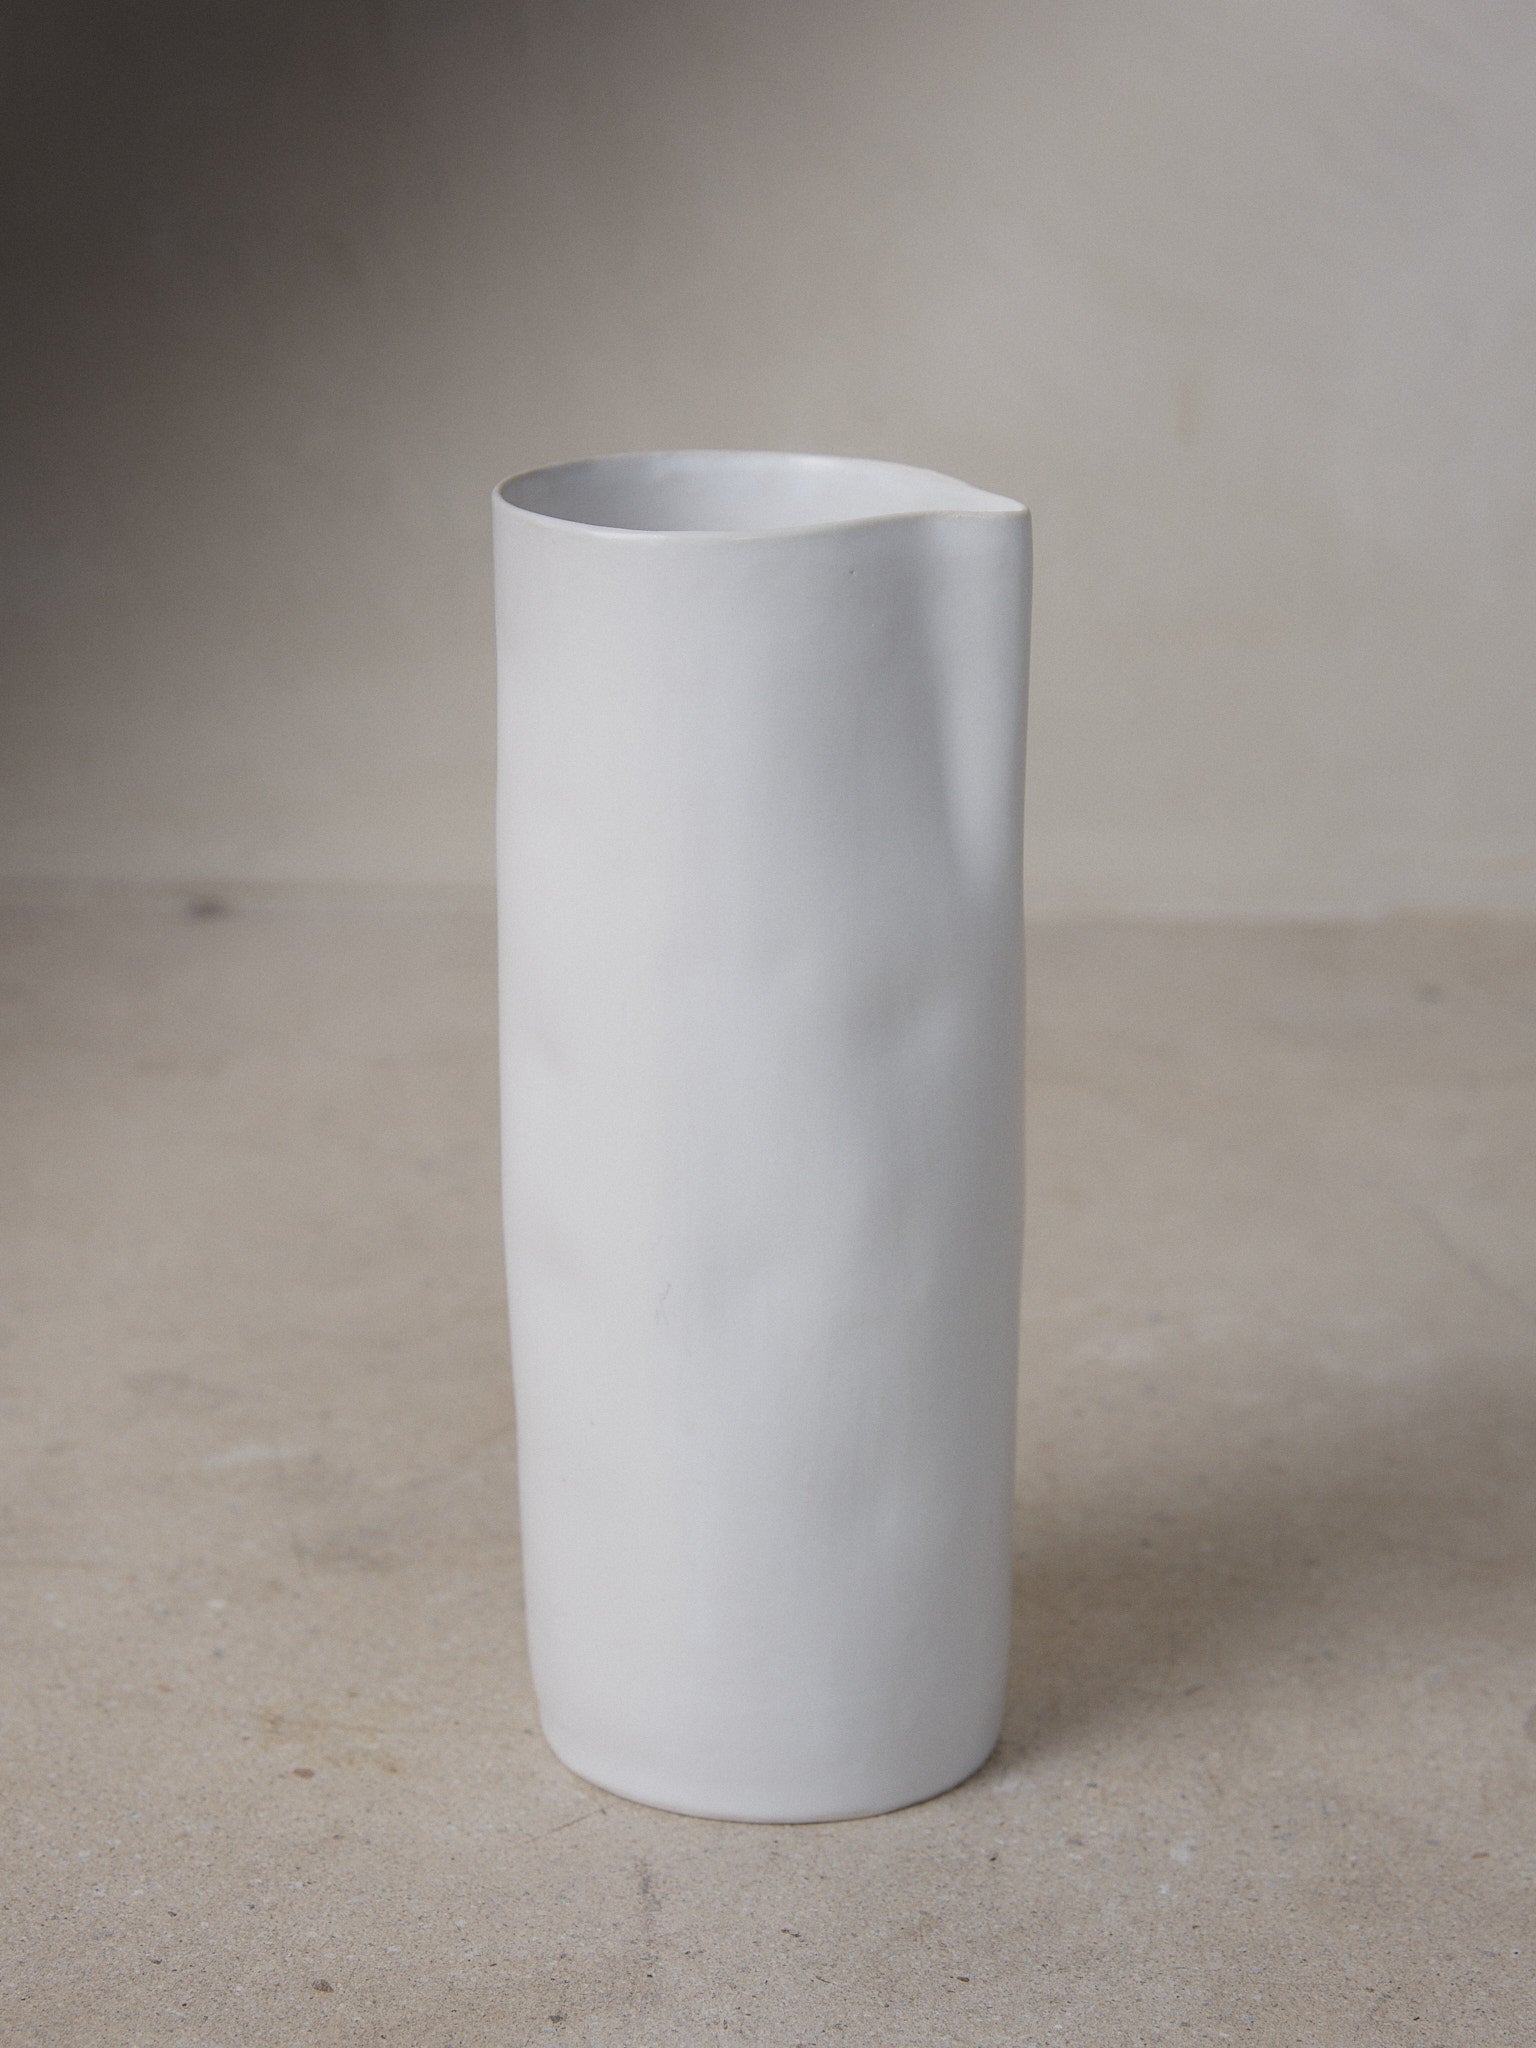 Raw Carafe. Exclusively ours. Designed to fit naturally in the hand, this minimalist, hand-formed carafe recalls the natural world with a perfectly imperfect bodice in versatile matte white stoneware.